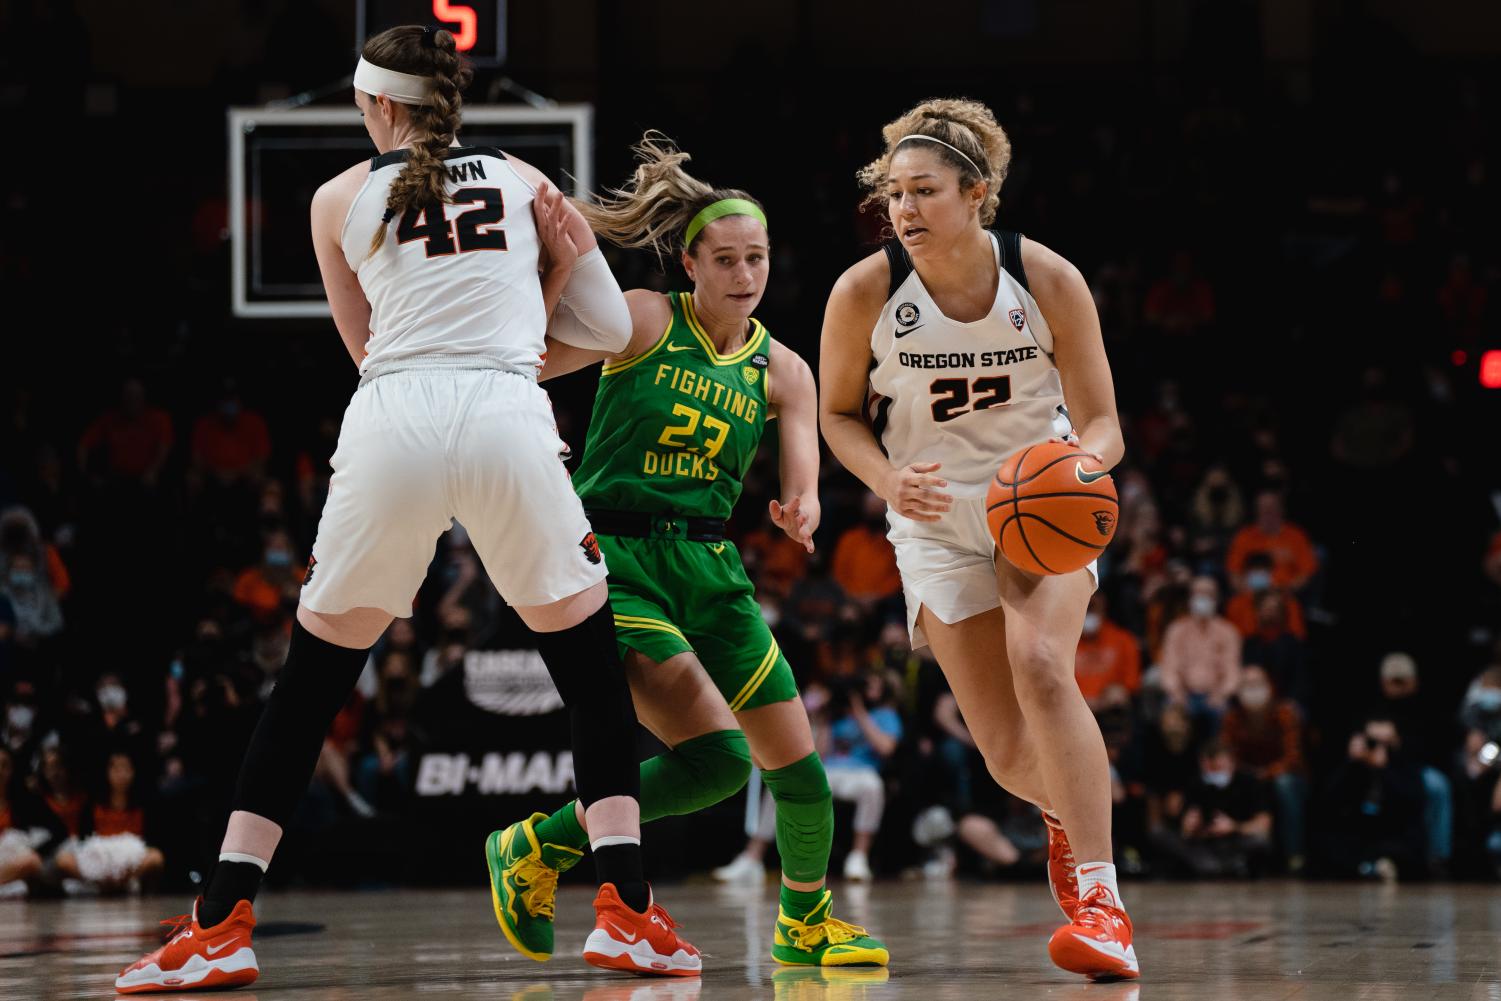 Oregon State WBB stays hot, earns win against Ducks, MBB goes 2-0